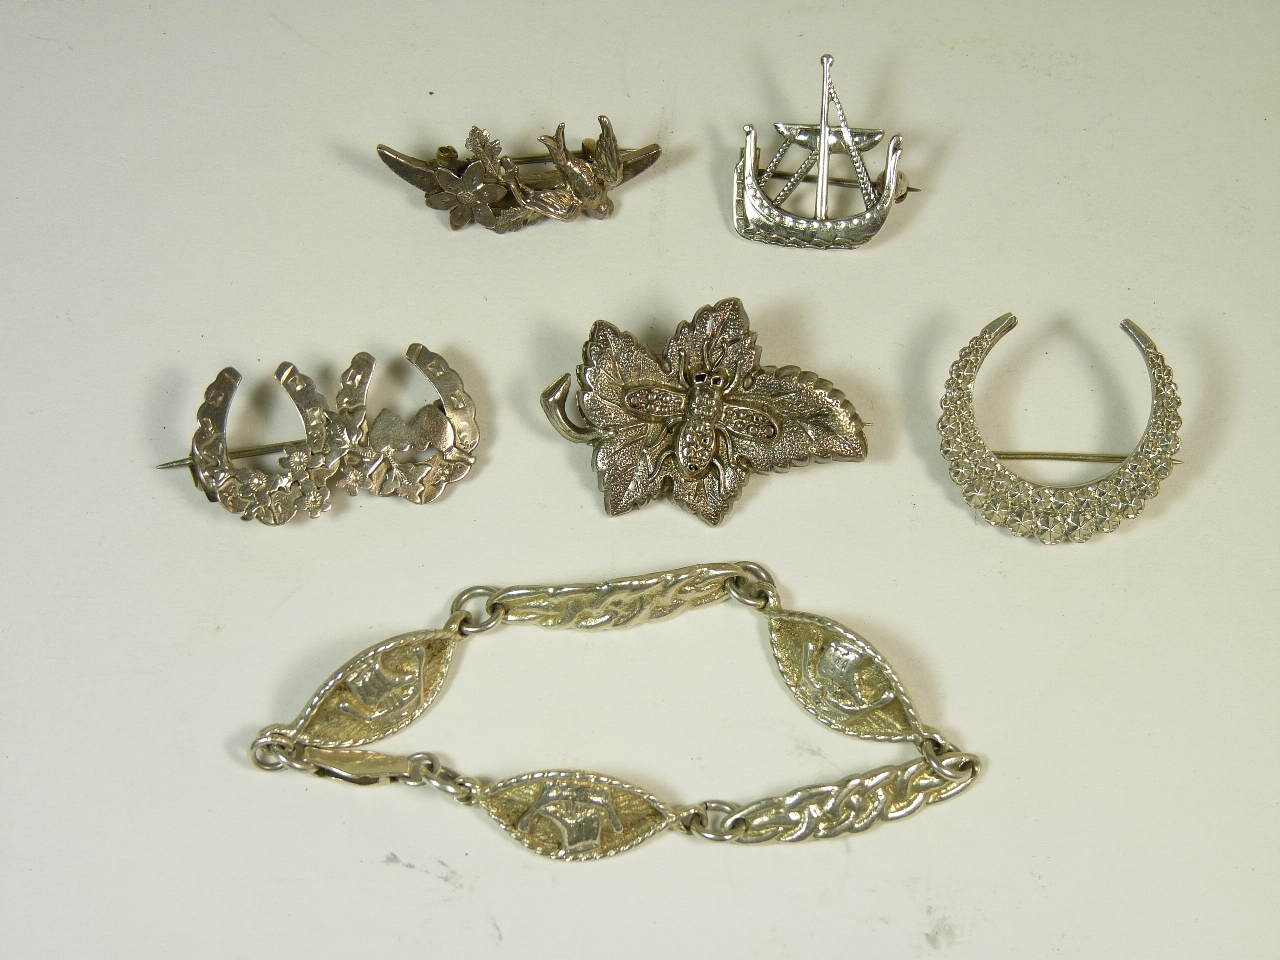 Five decorative silver brooches and a silver bracelet